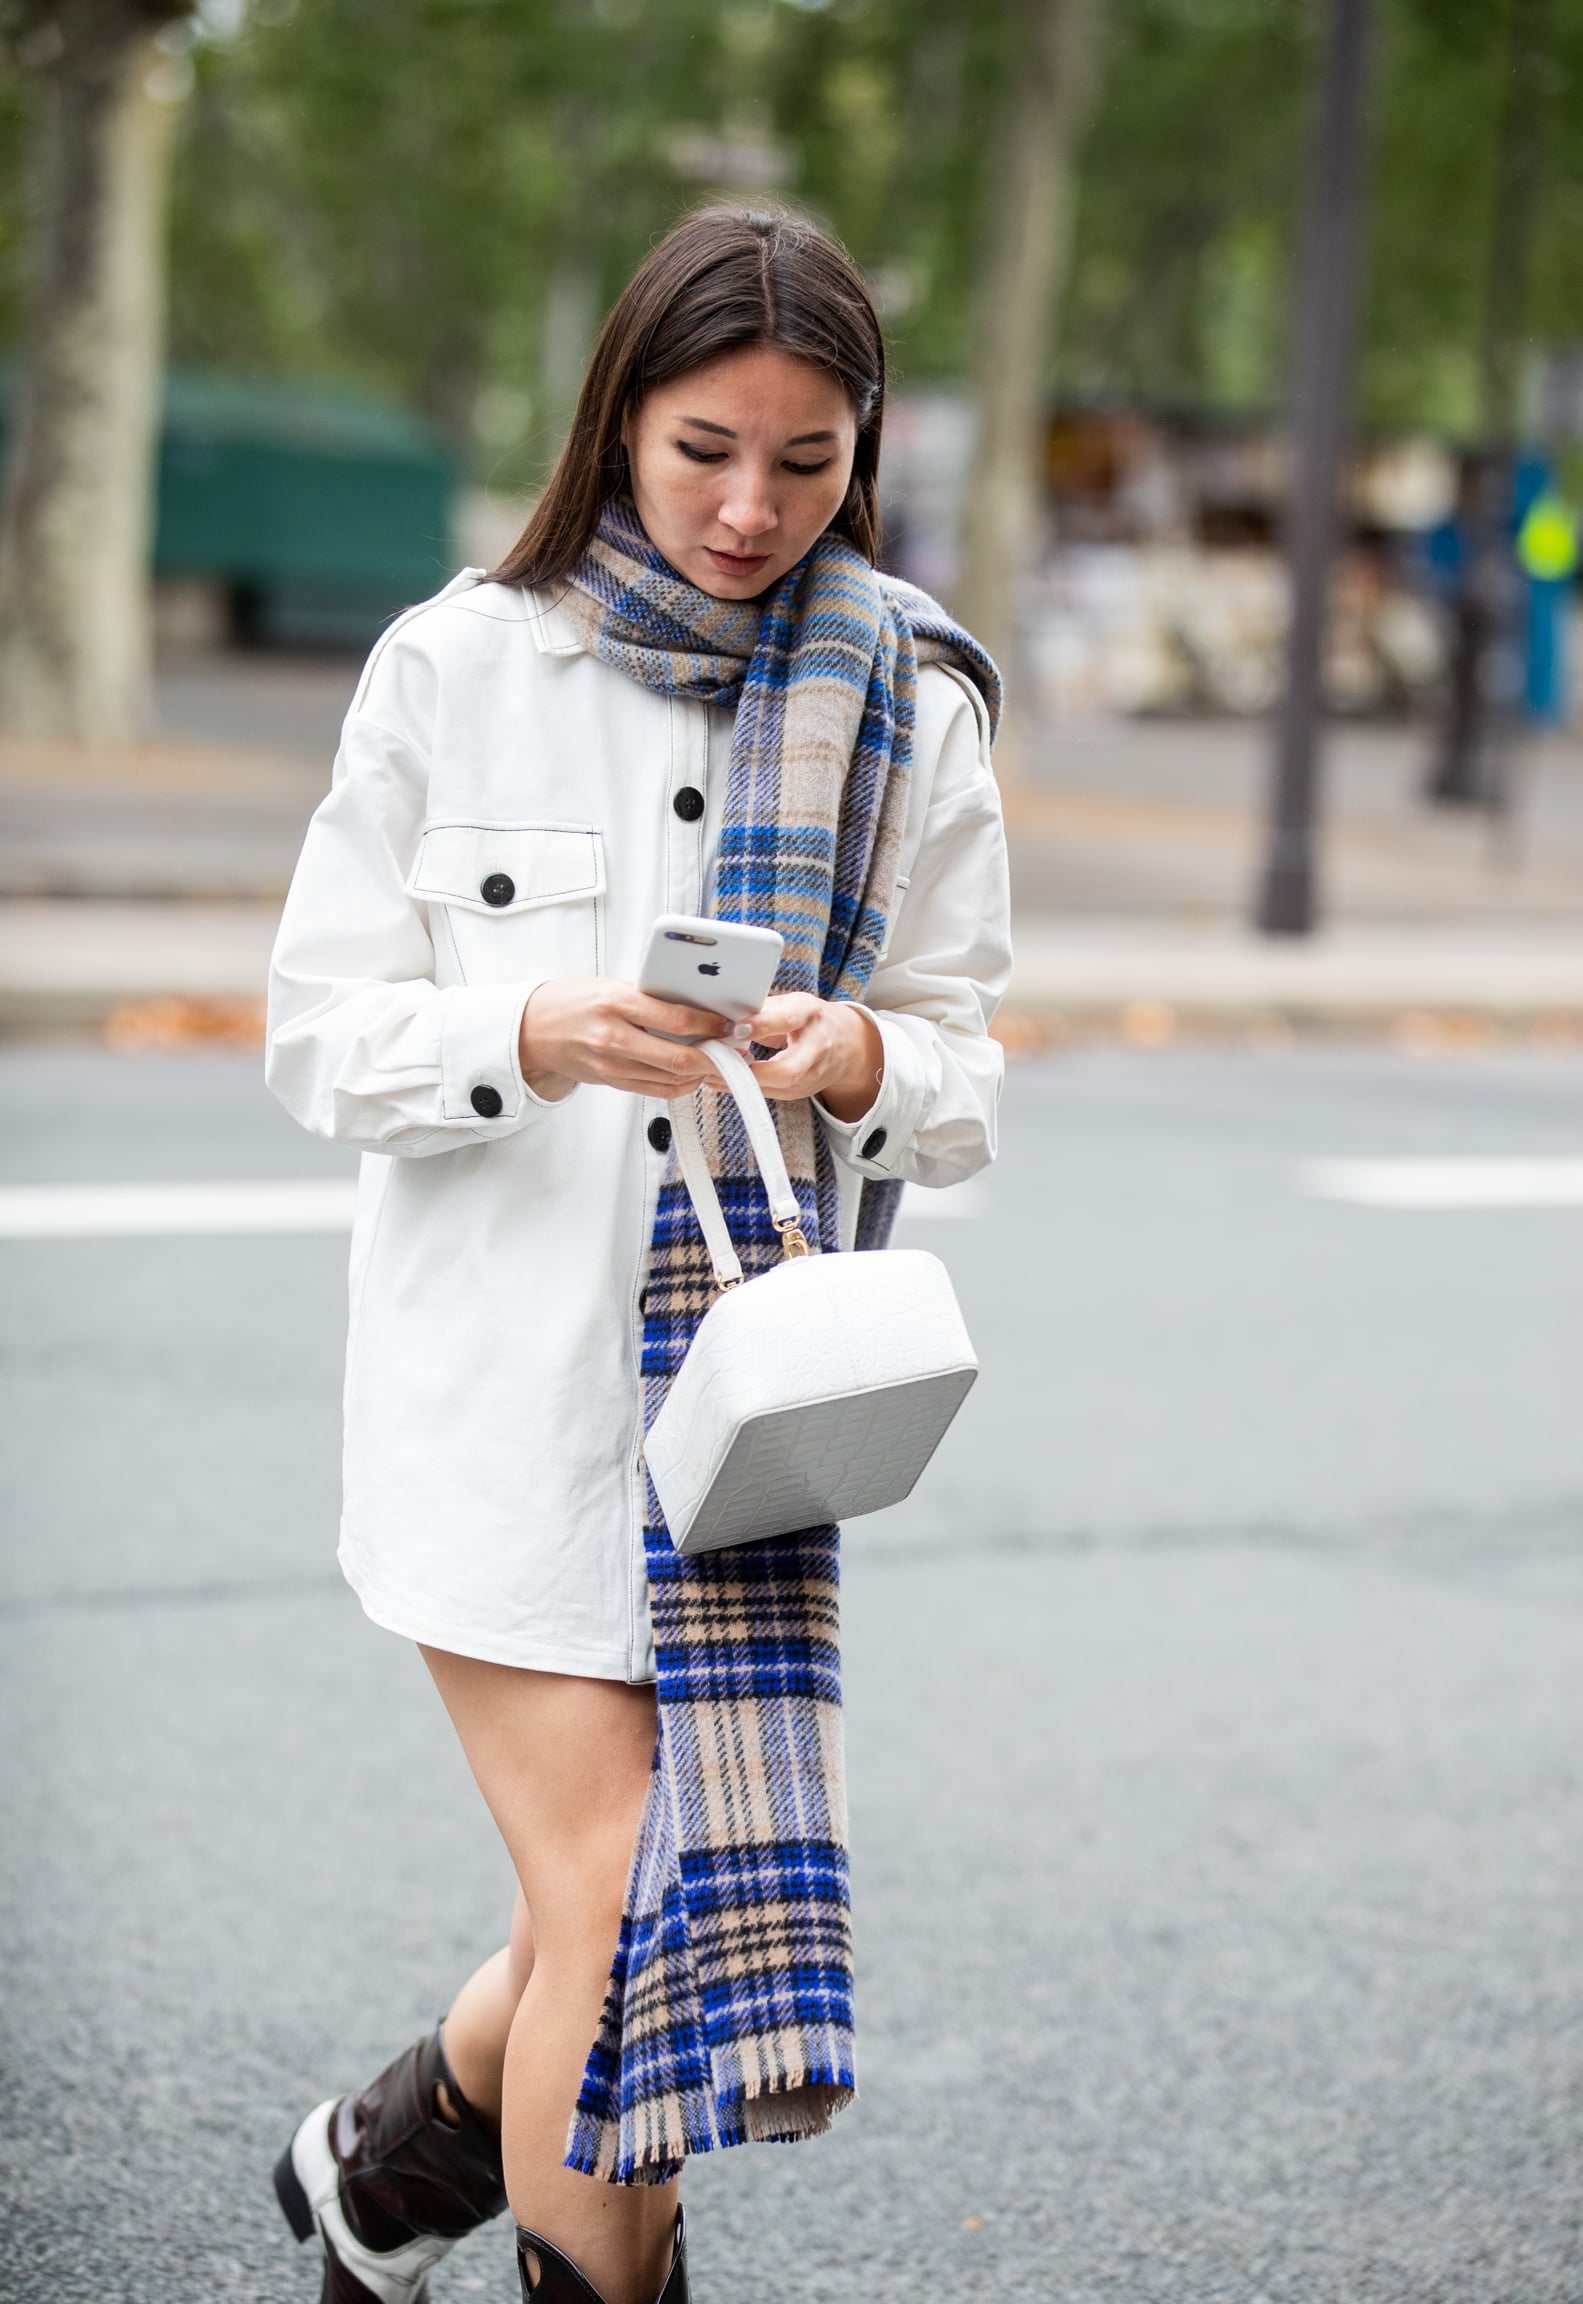 Winter Outfit Ideas For Styling Your Blanket Scarf | POPSUGAR Fashion